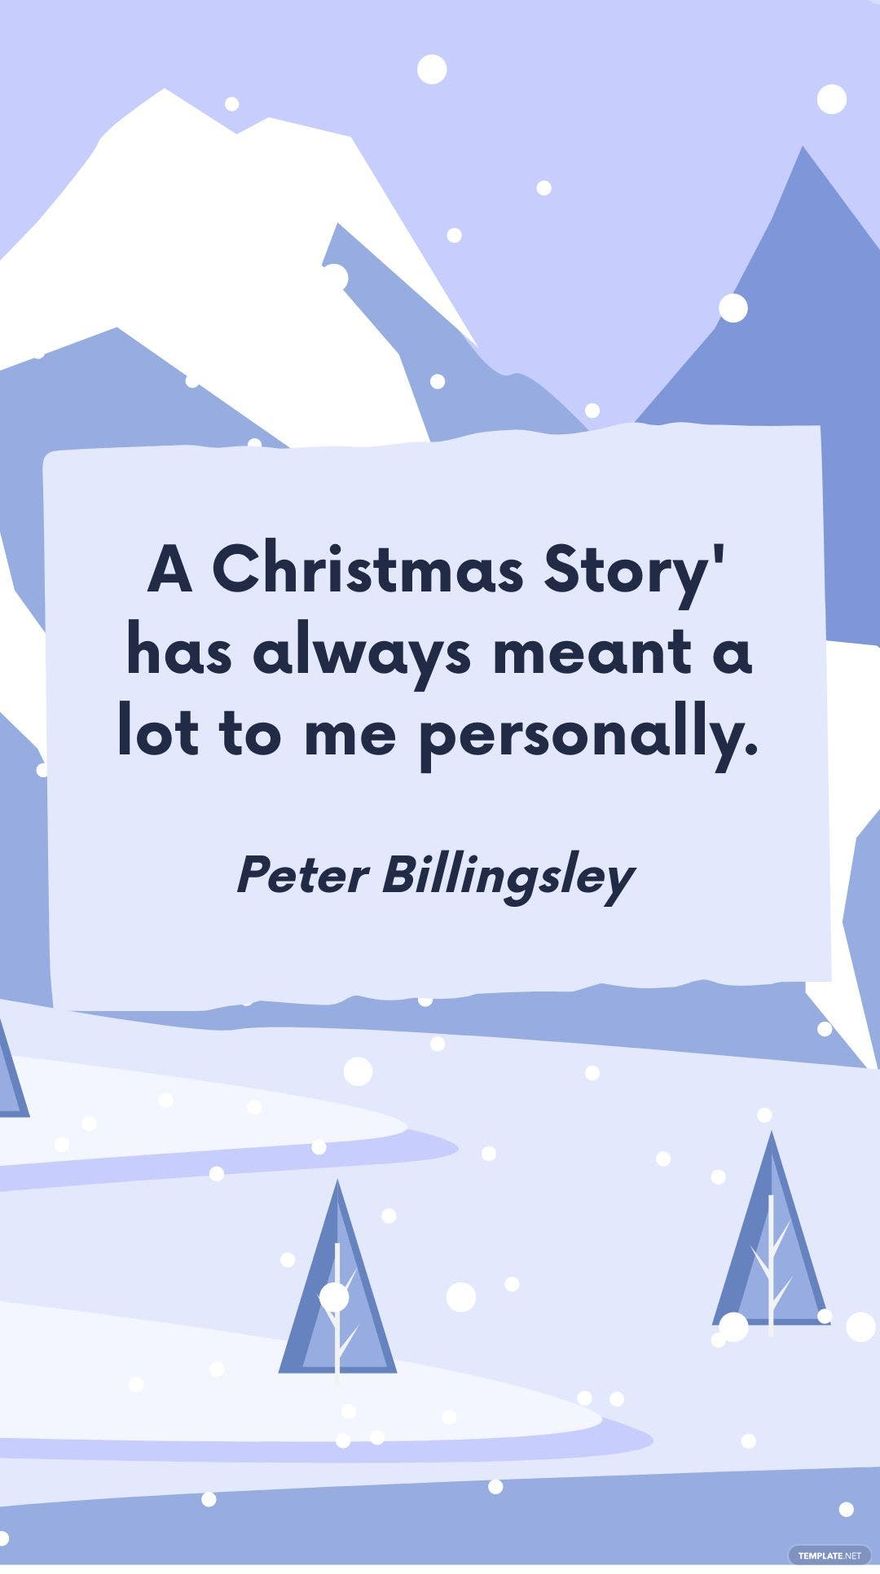 Peter Billingsley - A Christmas Story' has always meant a lot to me personally.